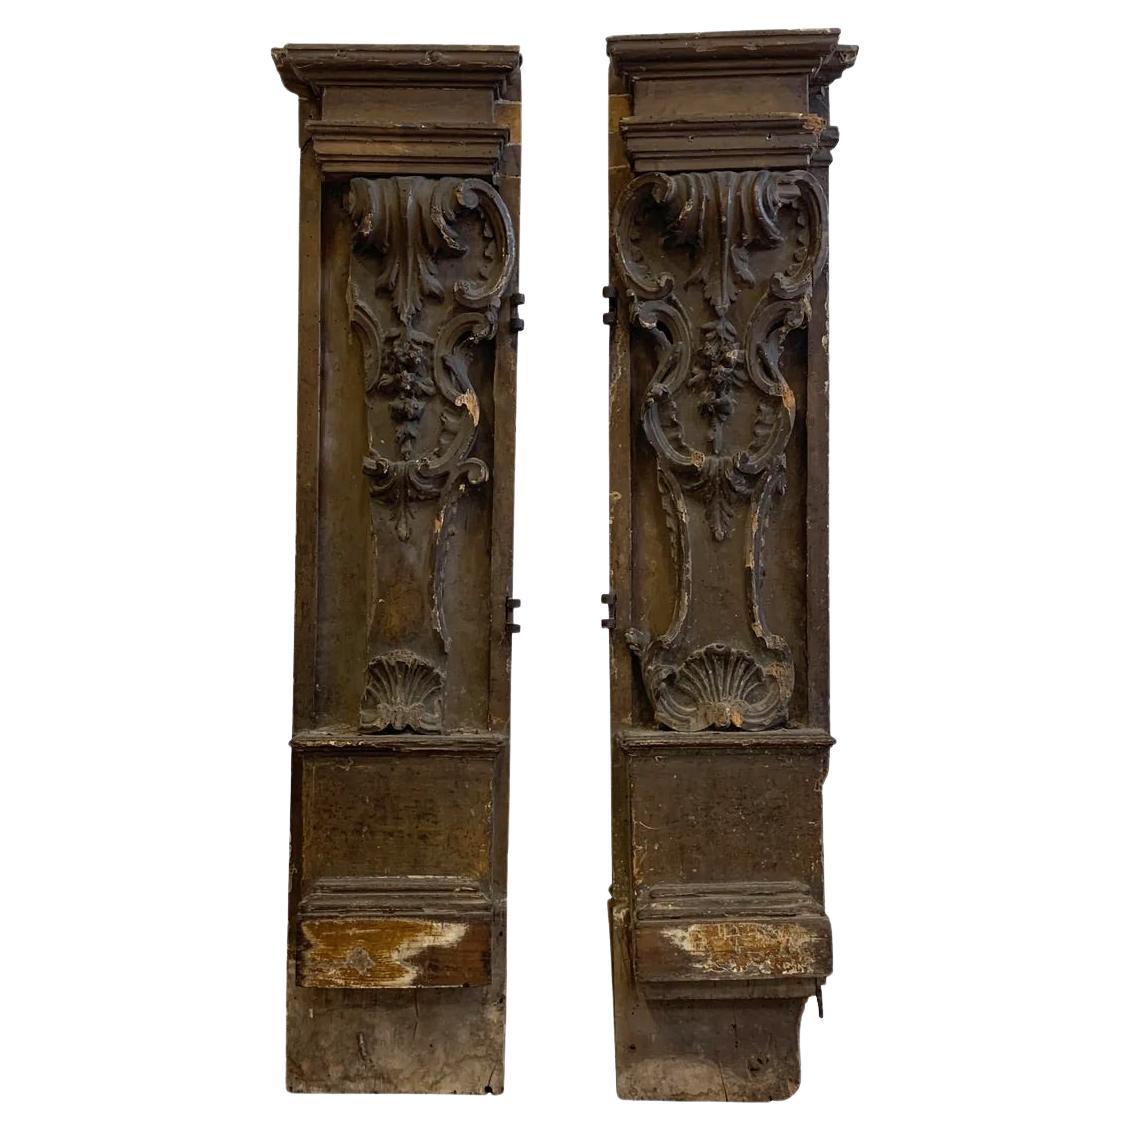 Pair of 19th Century Italian Cathedral Gates Architectural Fragments